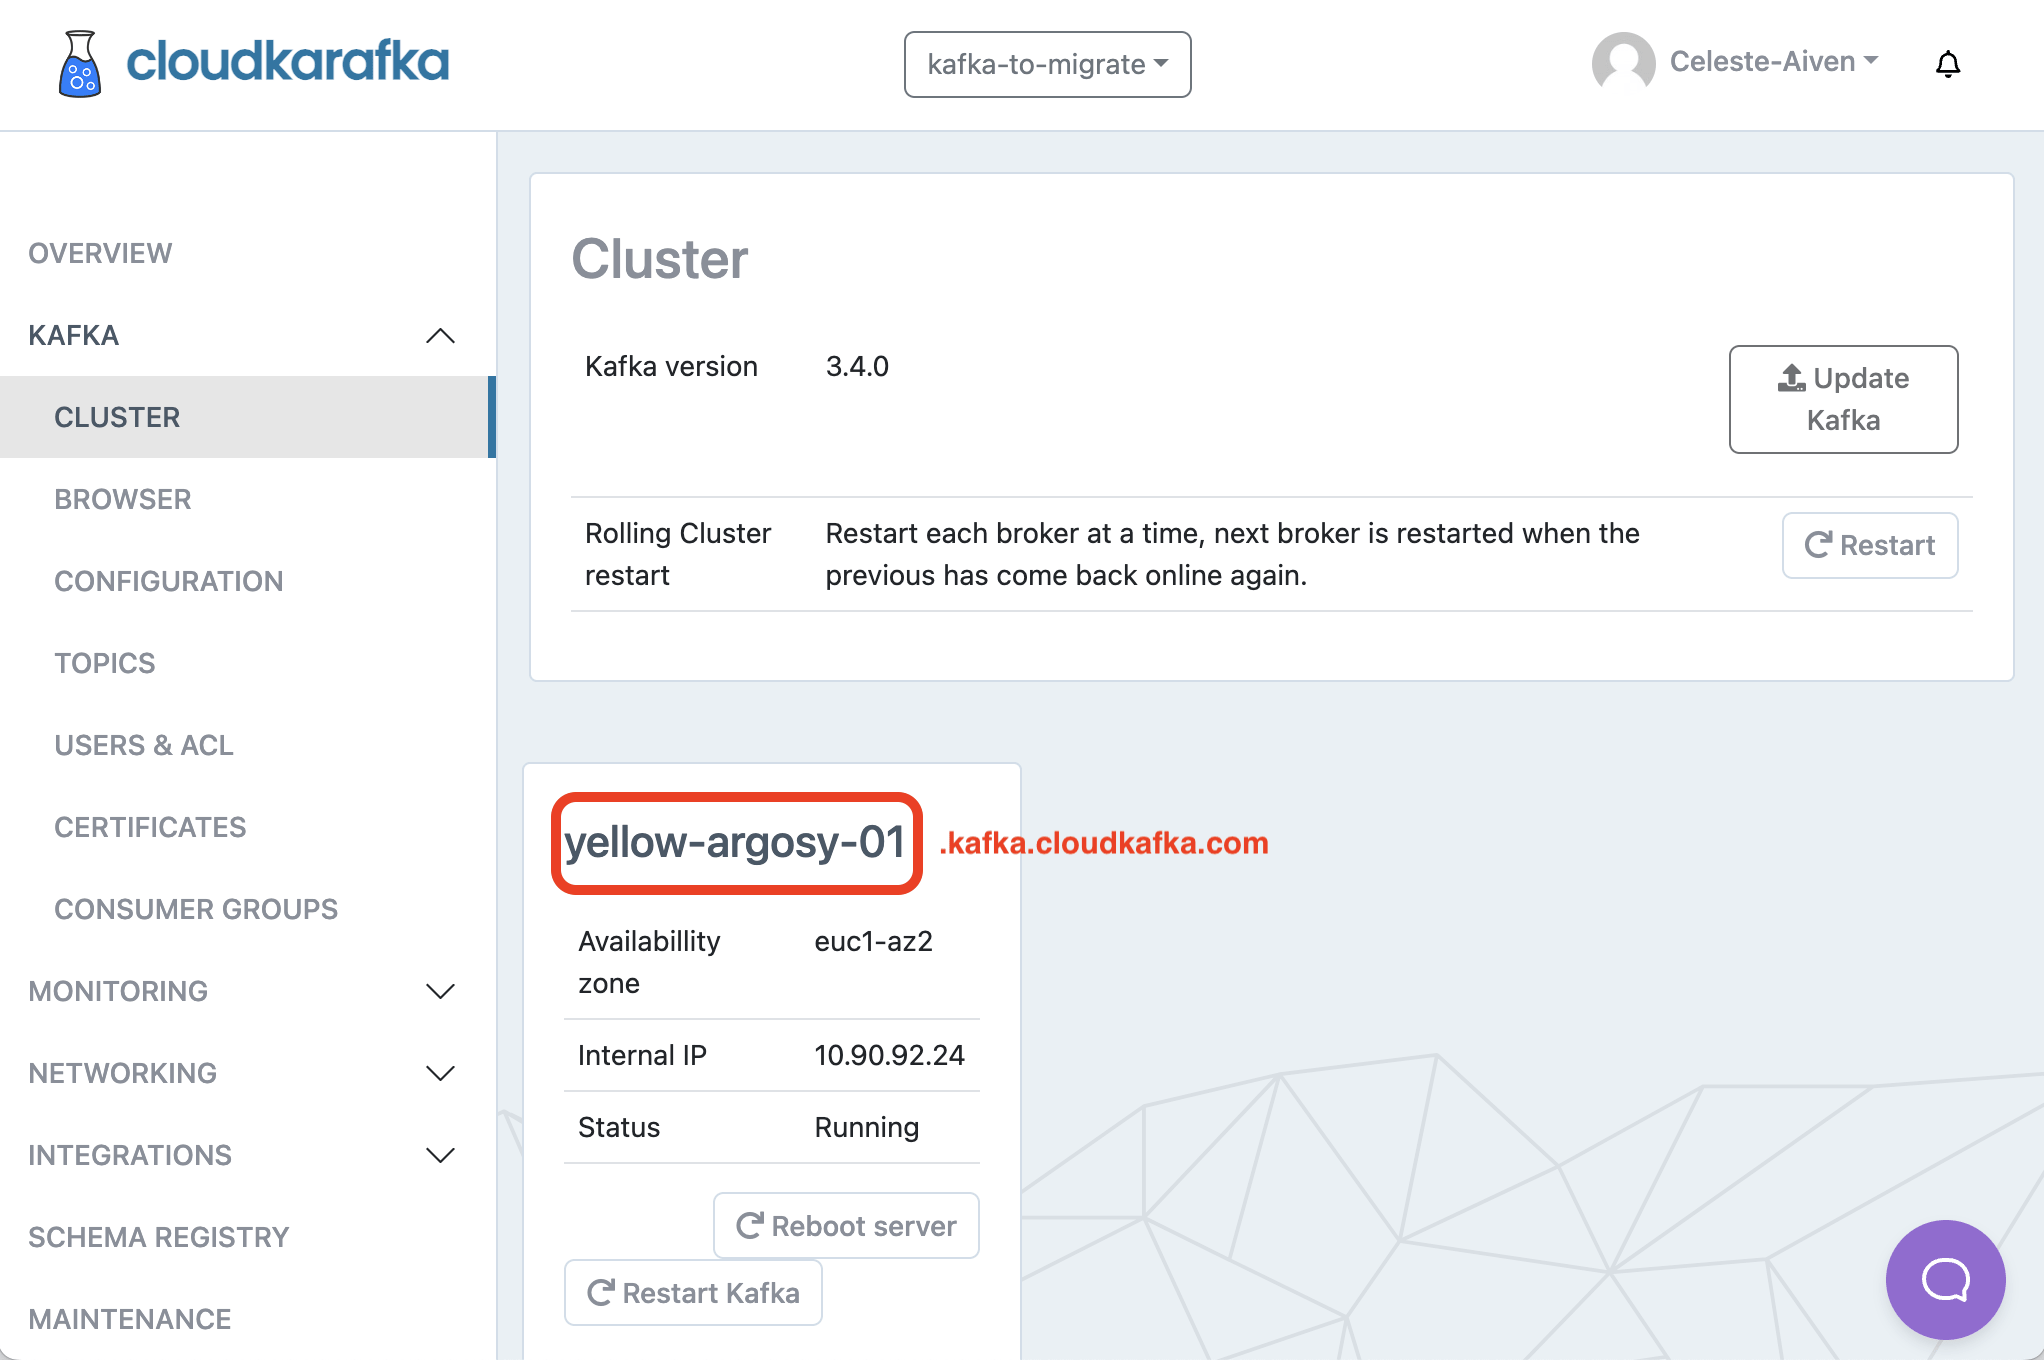 CloudKarafka Cluster page with server name highlighted. This will form the basis of the bootstrap servers in our next steps.